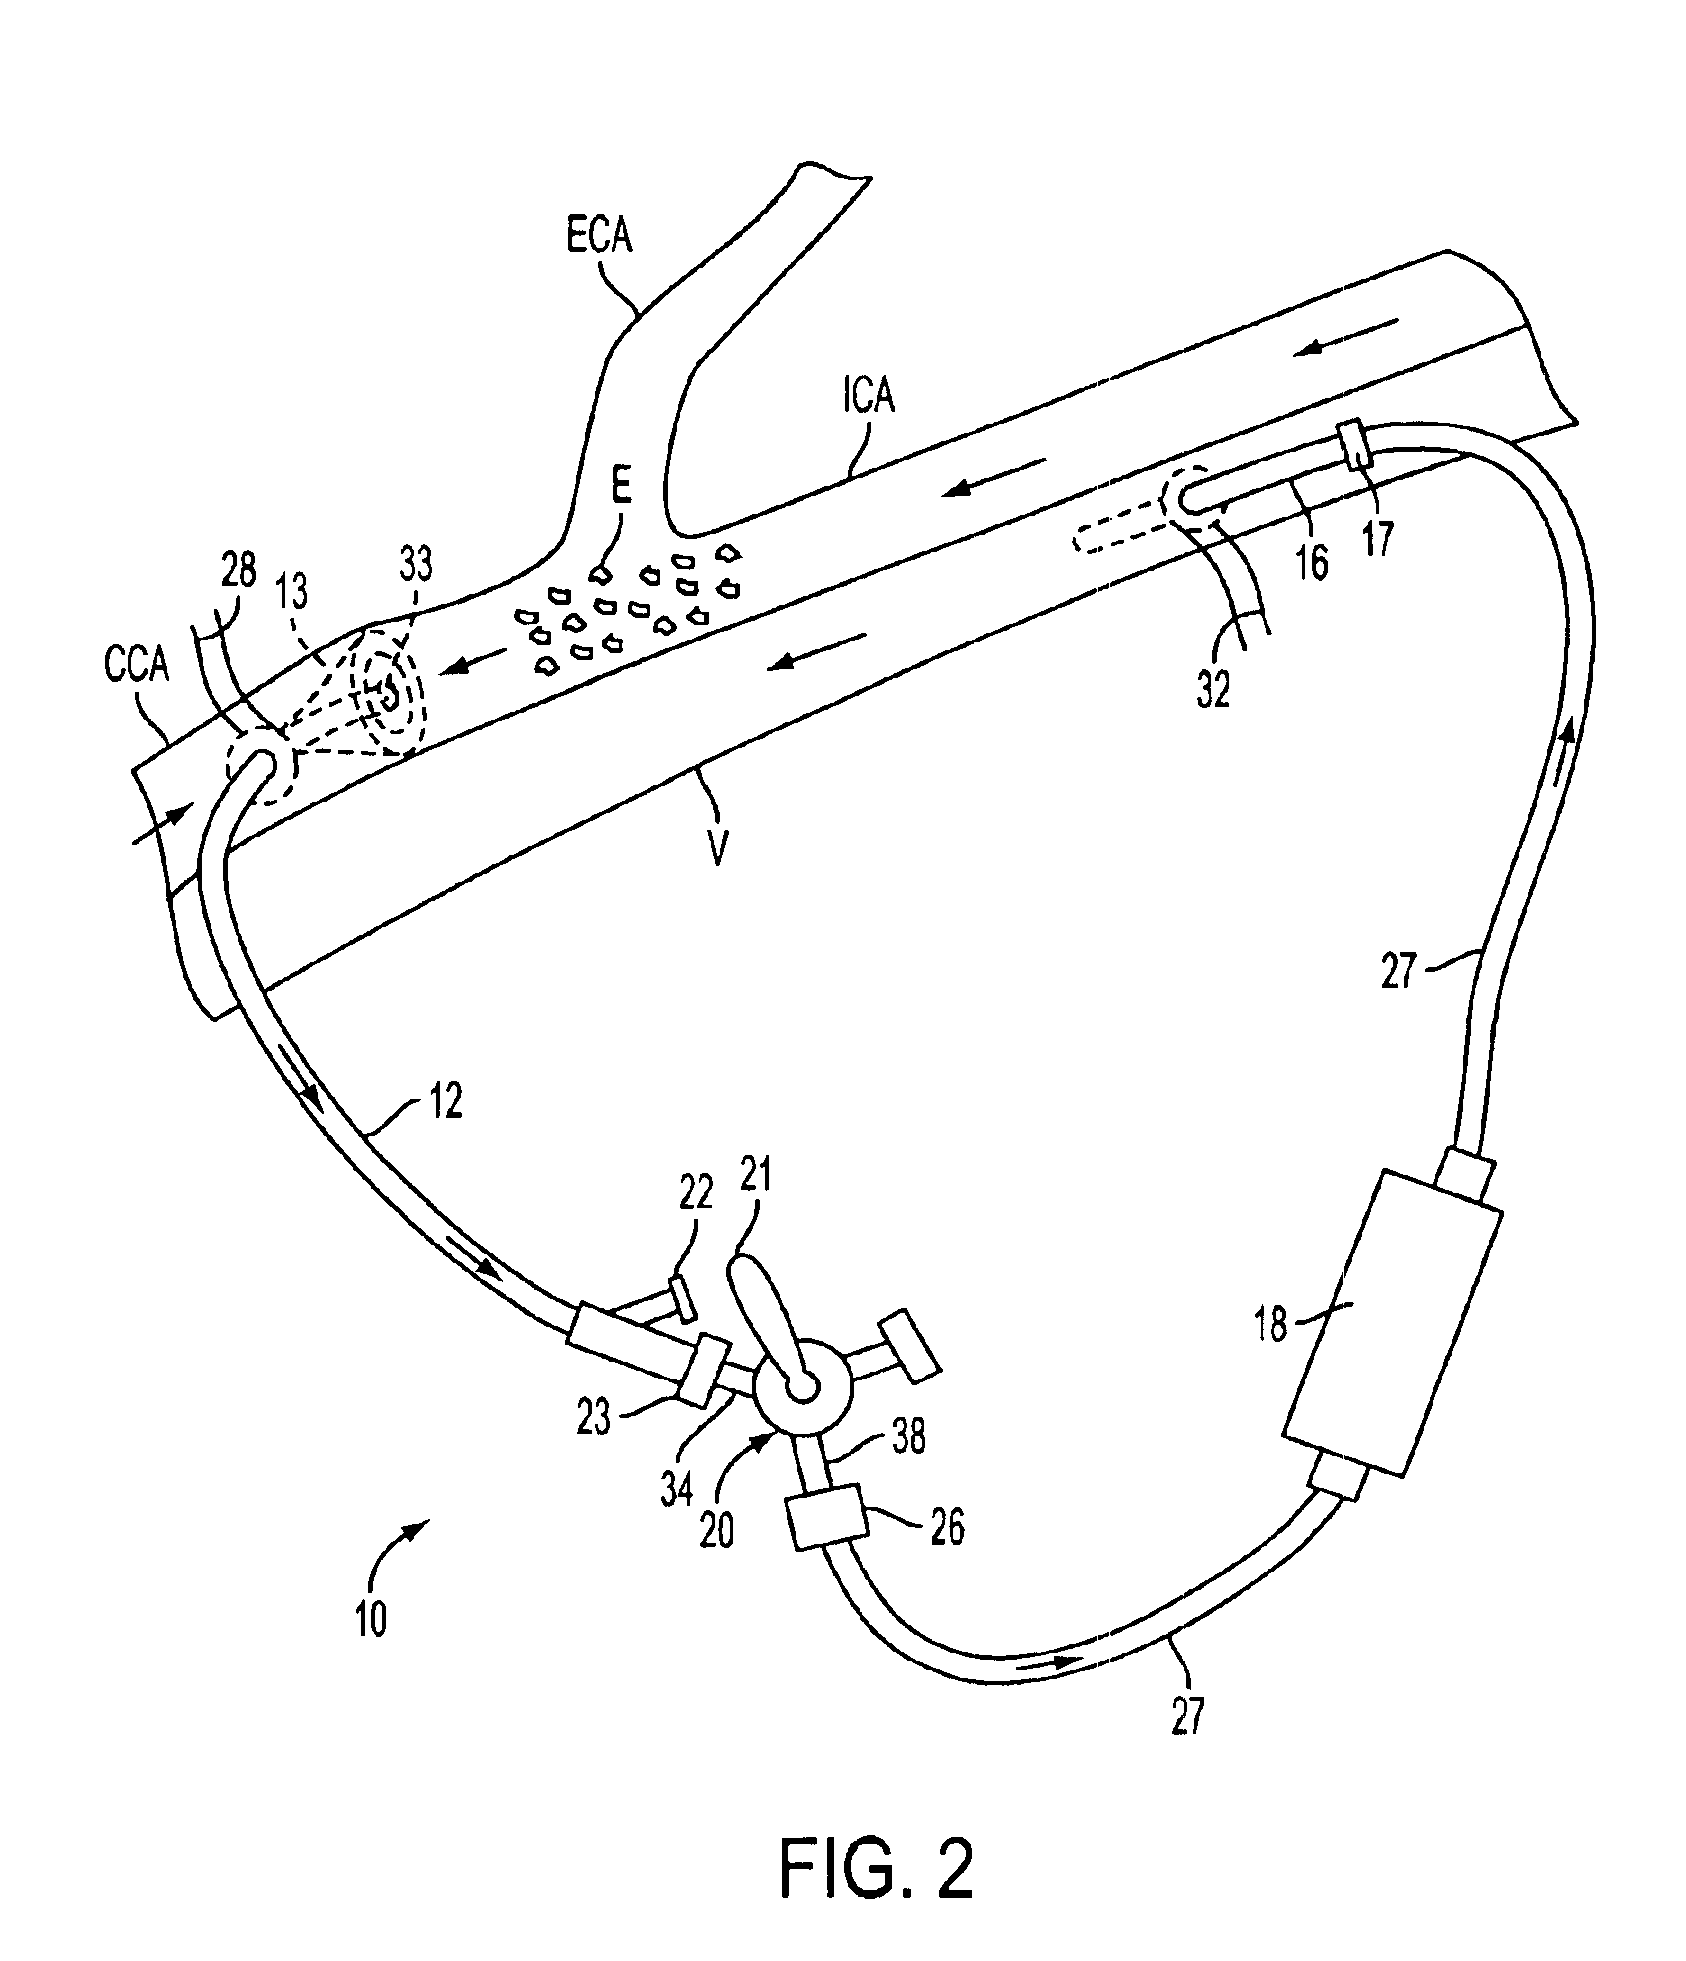 Apparatus and methods for removing emboli during a surgical procedure